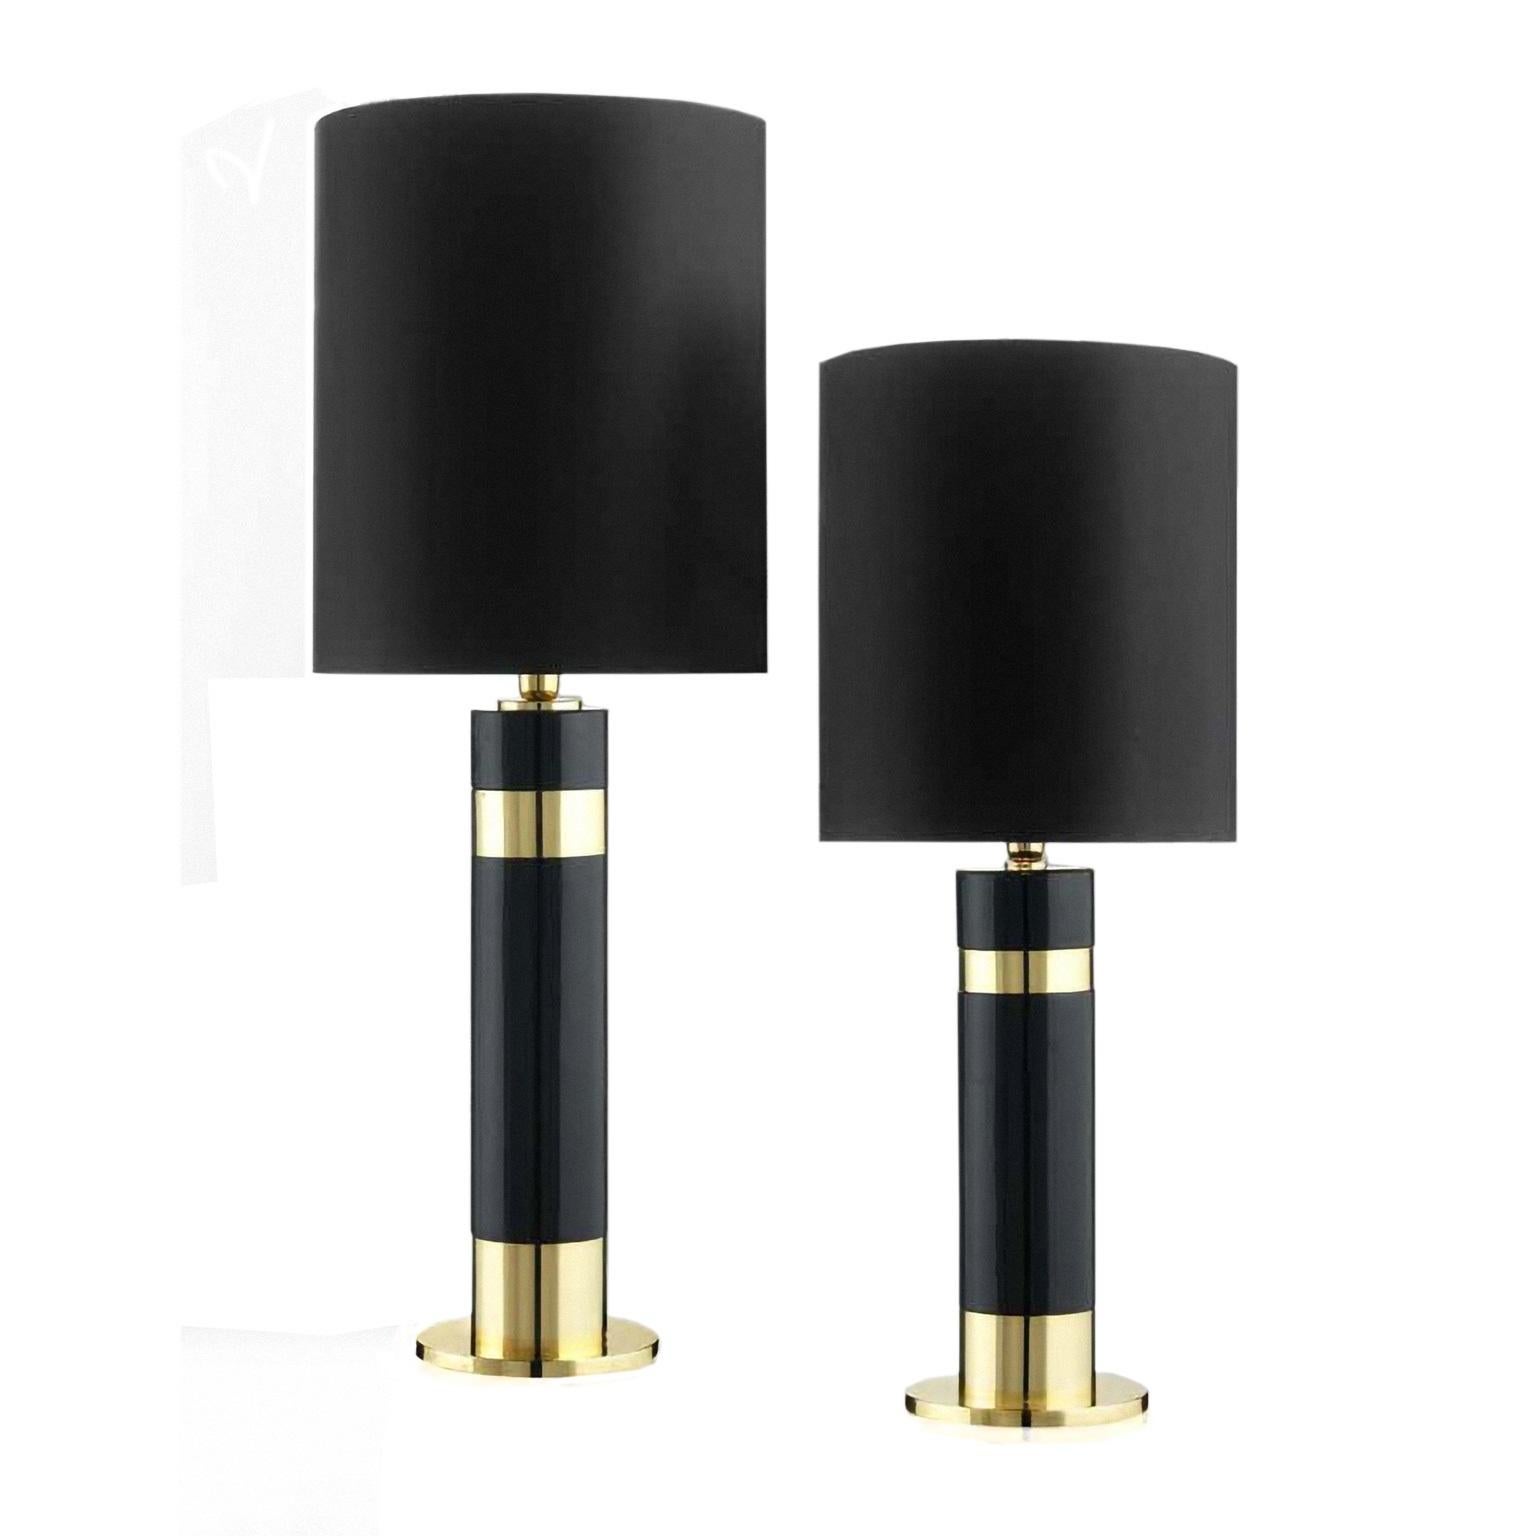 Contemporary HERMES 2, Ceramic Lamp Black Glazed and Handcrafted in 24-Karat Gold For Sale